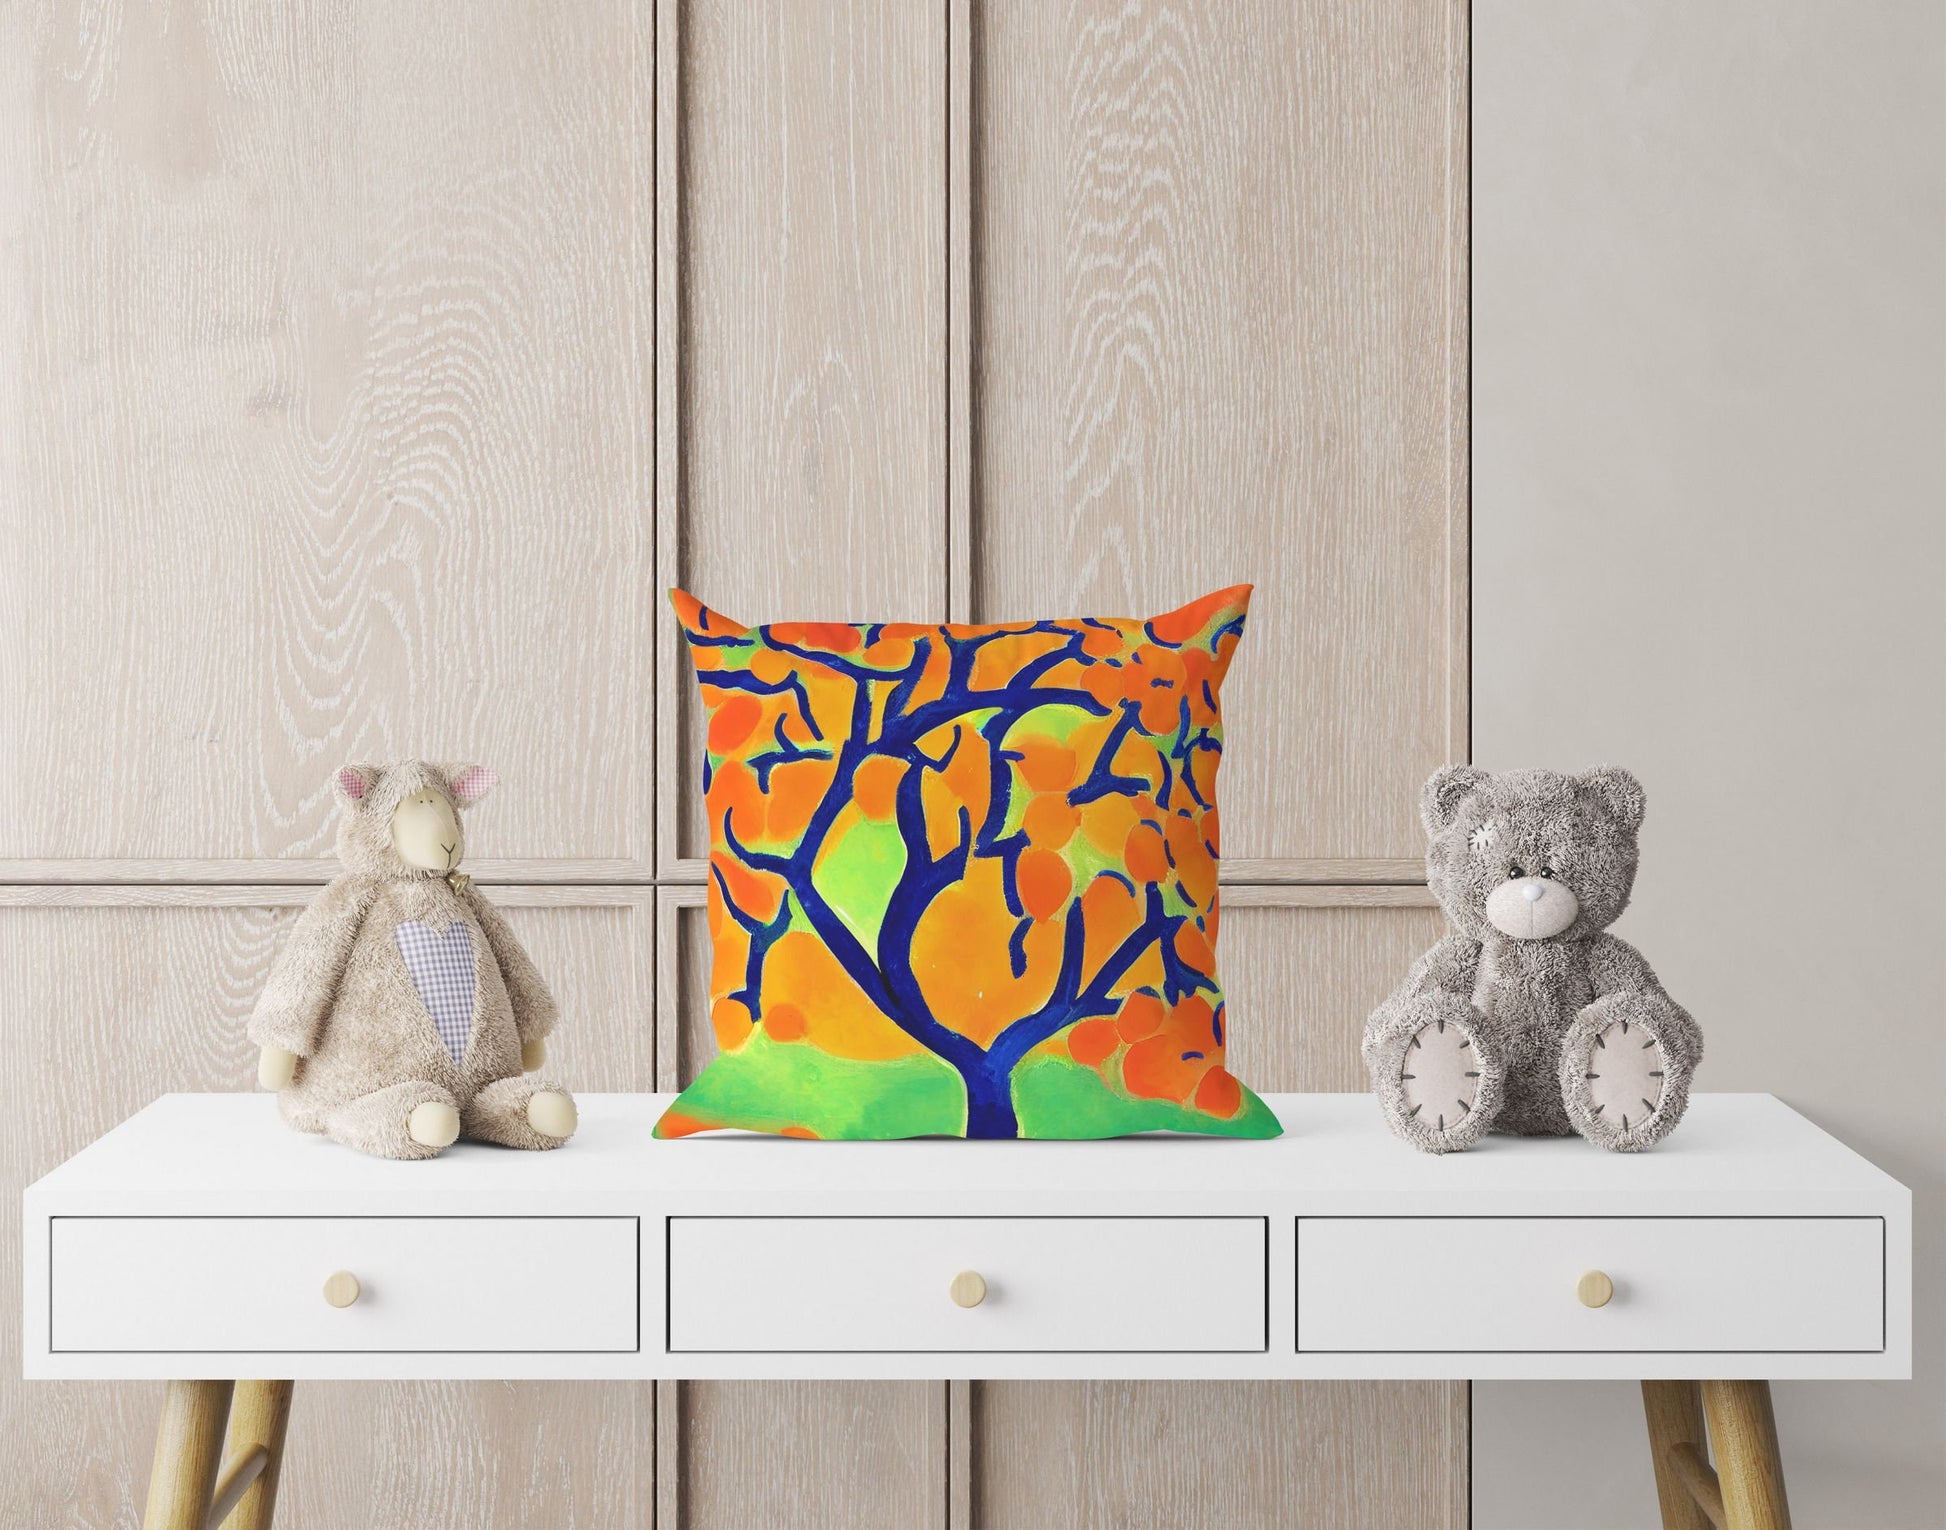 Tree Full Of Fruit Throw Pillow, Abstract Throw Pillow Cover, Soft Pillow Cases, Colorful Pillow Case, Contemporary Pillow 24X24 Pillow Case